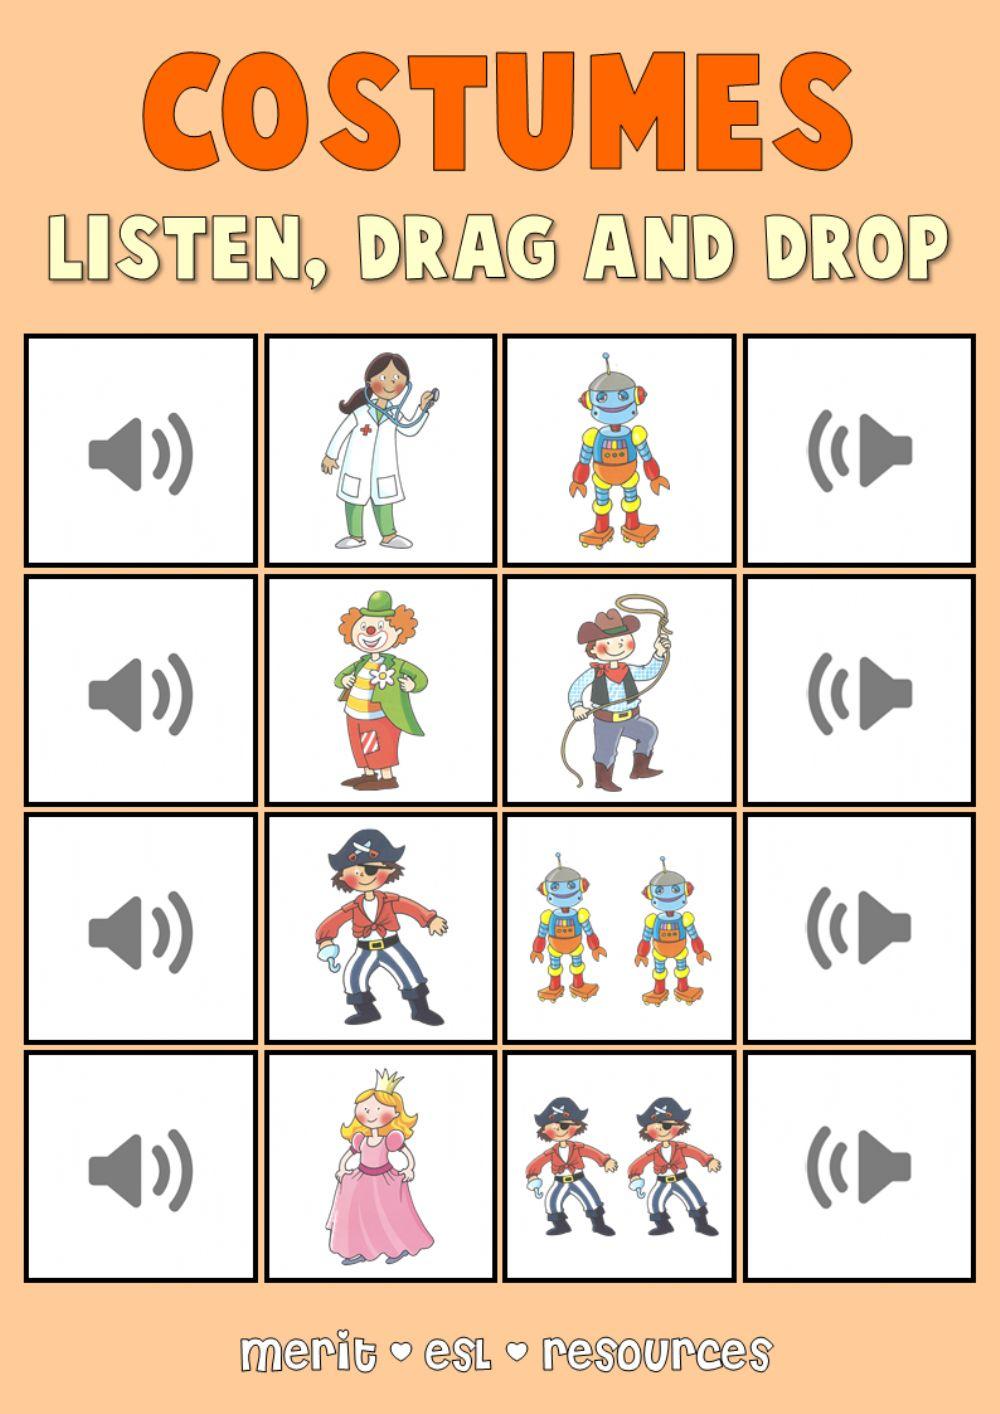 Costumes - Drag and drop